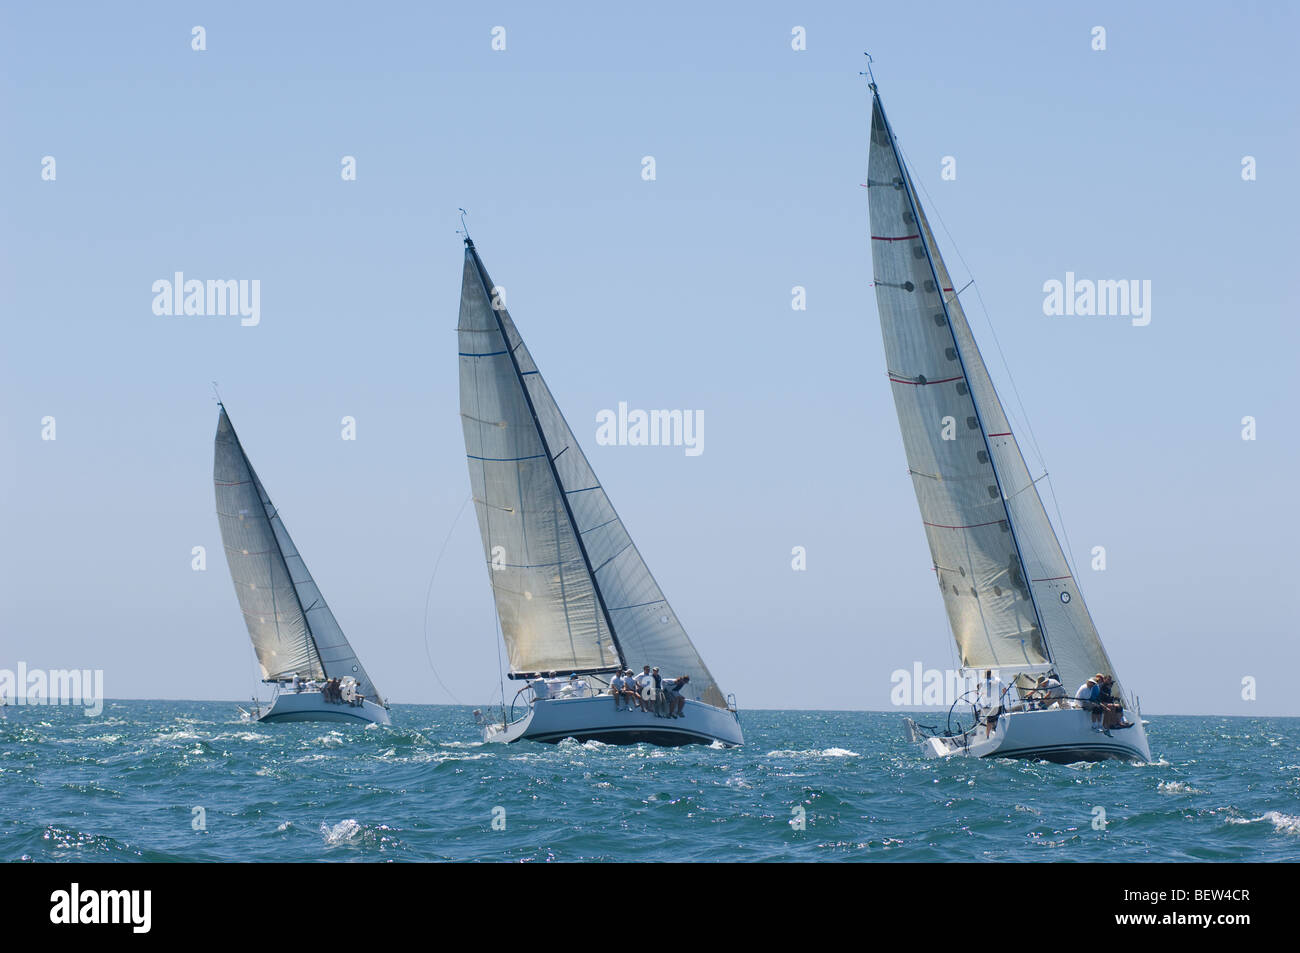 Three yachts compete in team sailing event, California Stock Photo